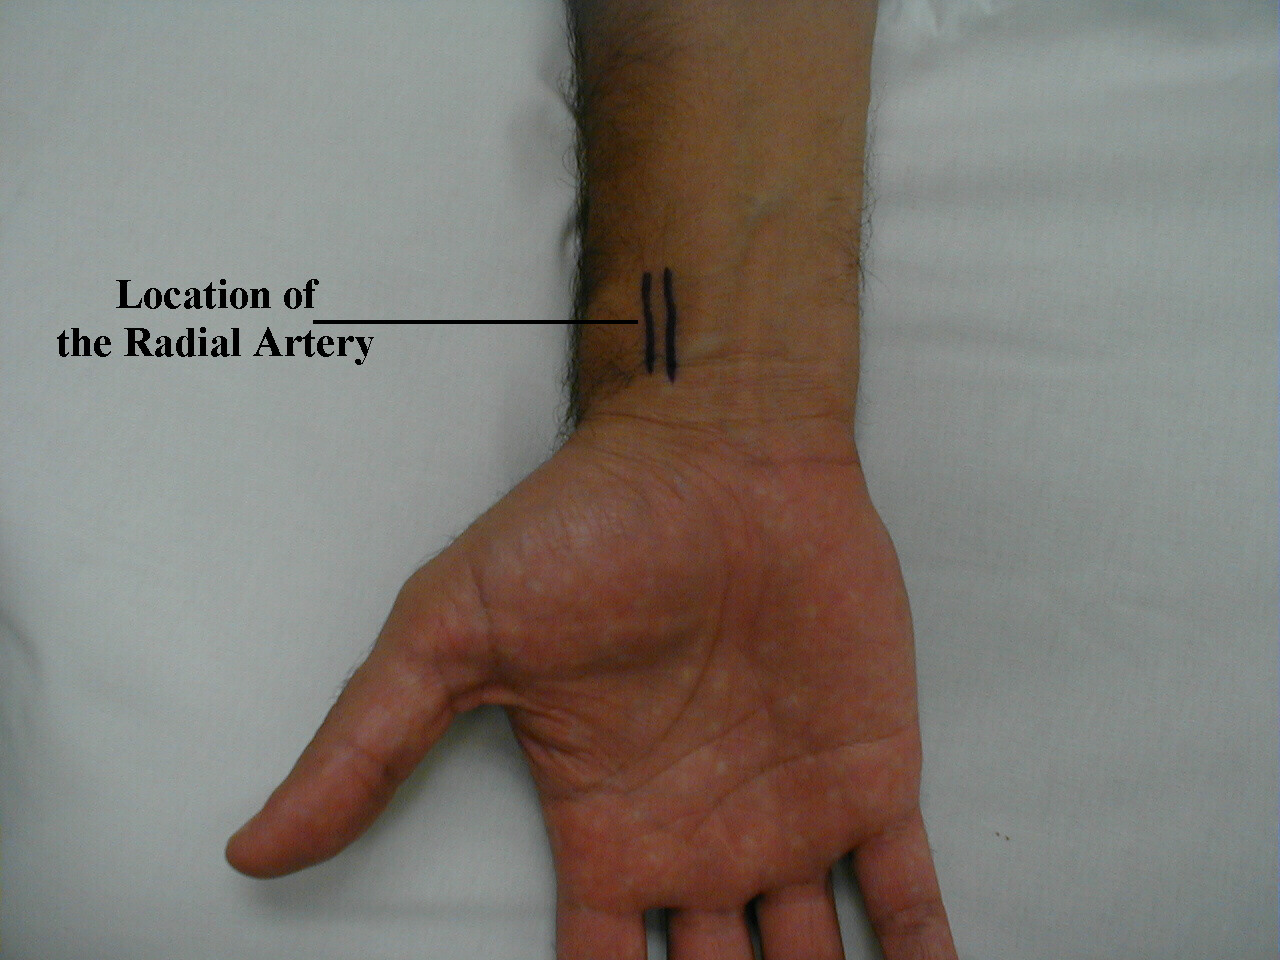 Location of the radial artery: Surface anatomy